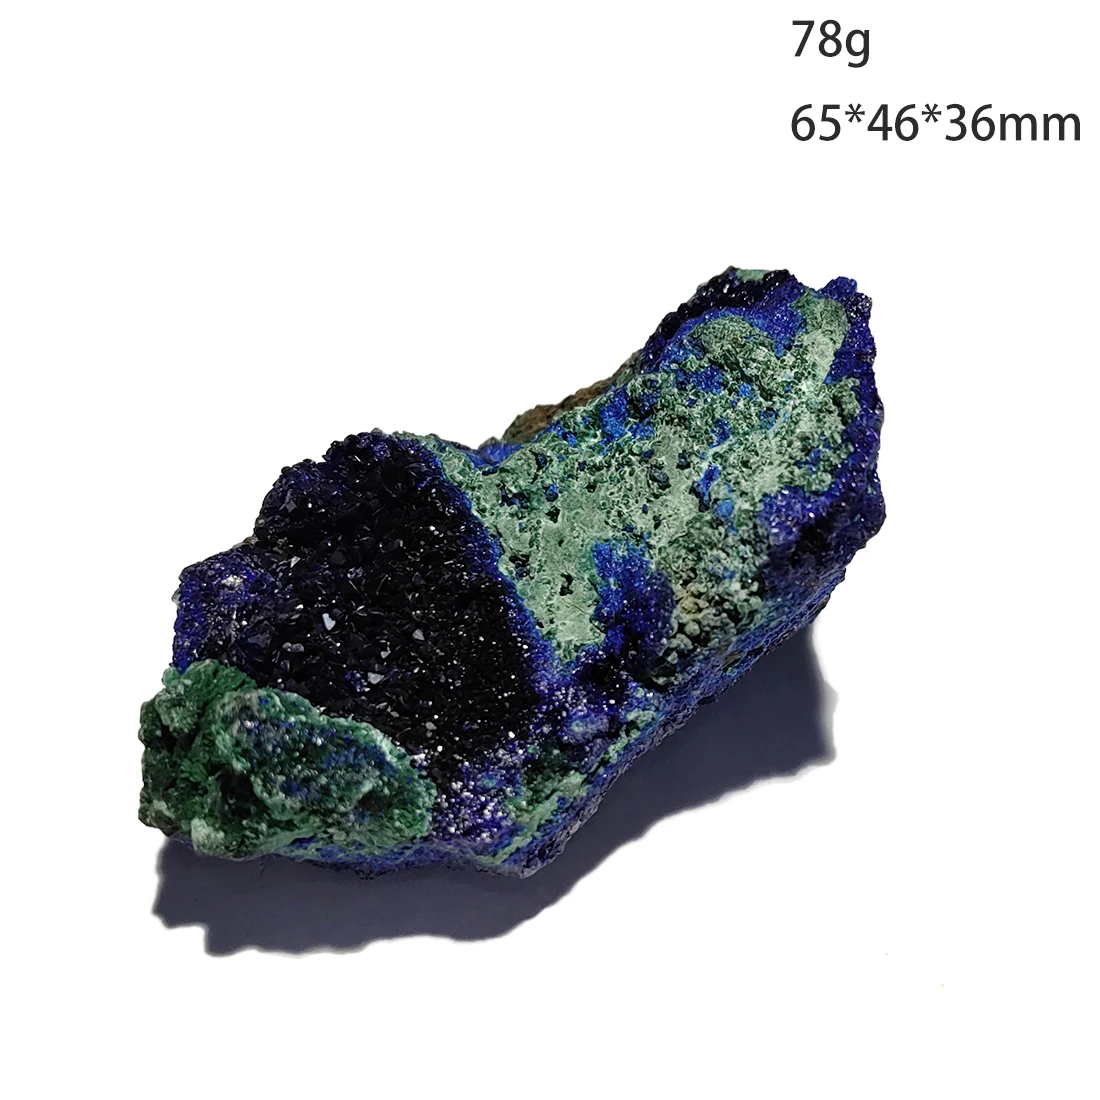 

C2-4G 100% Natural Stone Azurite Cluster Malachite Mineral Crystal Specimen Home Decoration from Anhui Province China